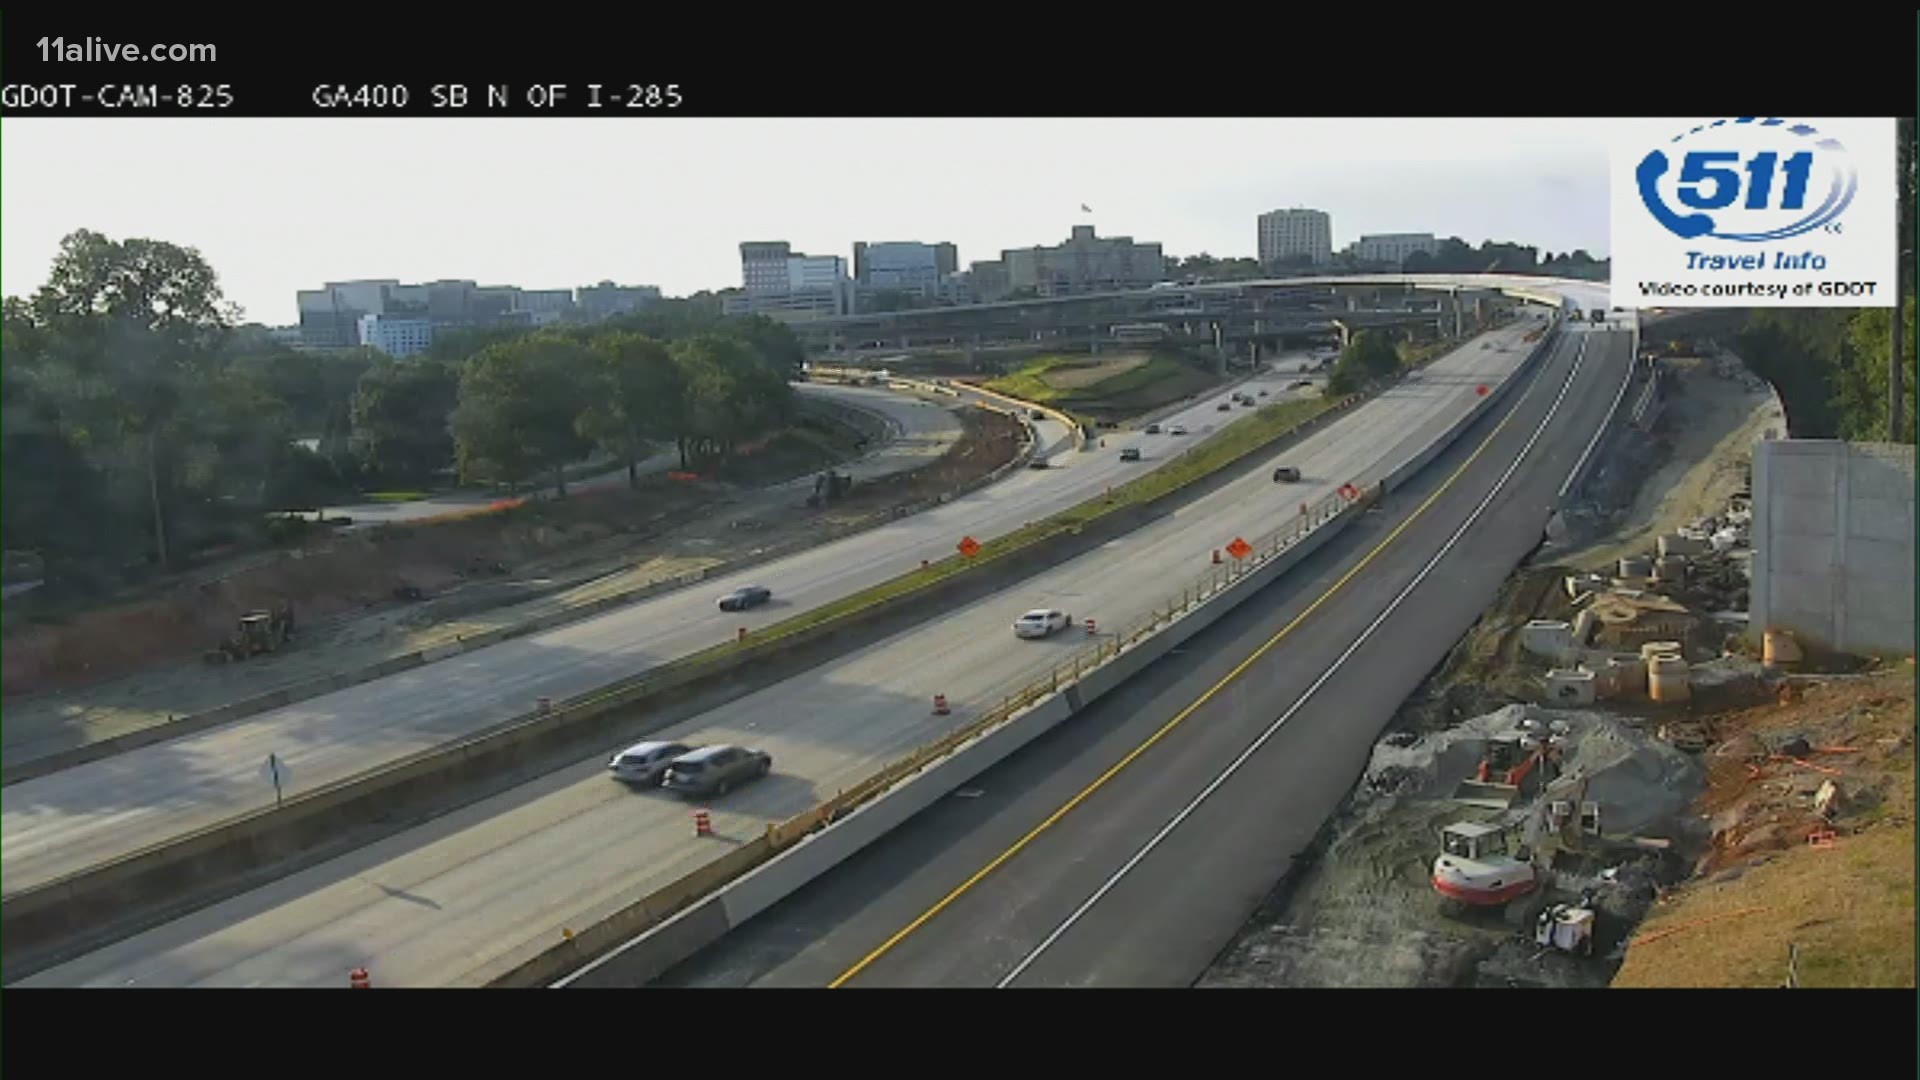 The construction at the I-285 interchange has been under construction for months.